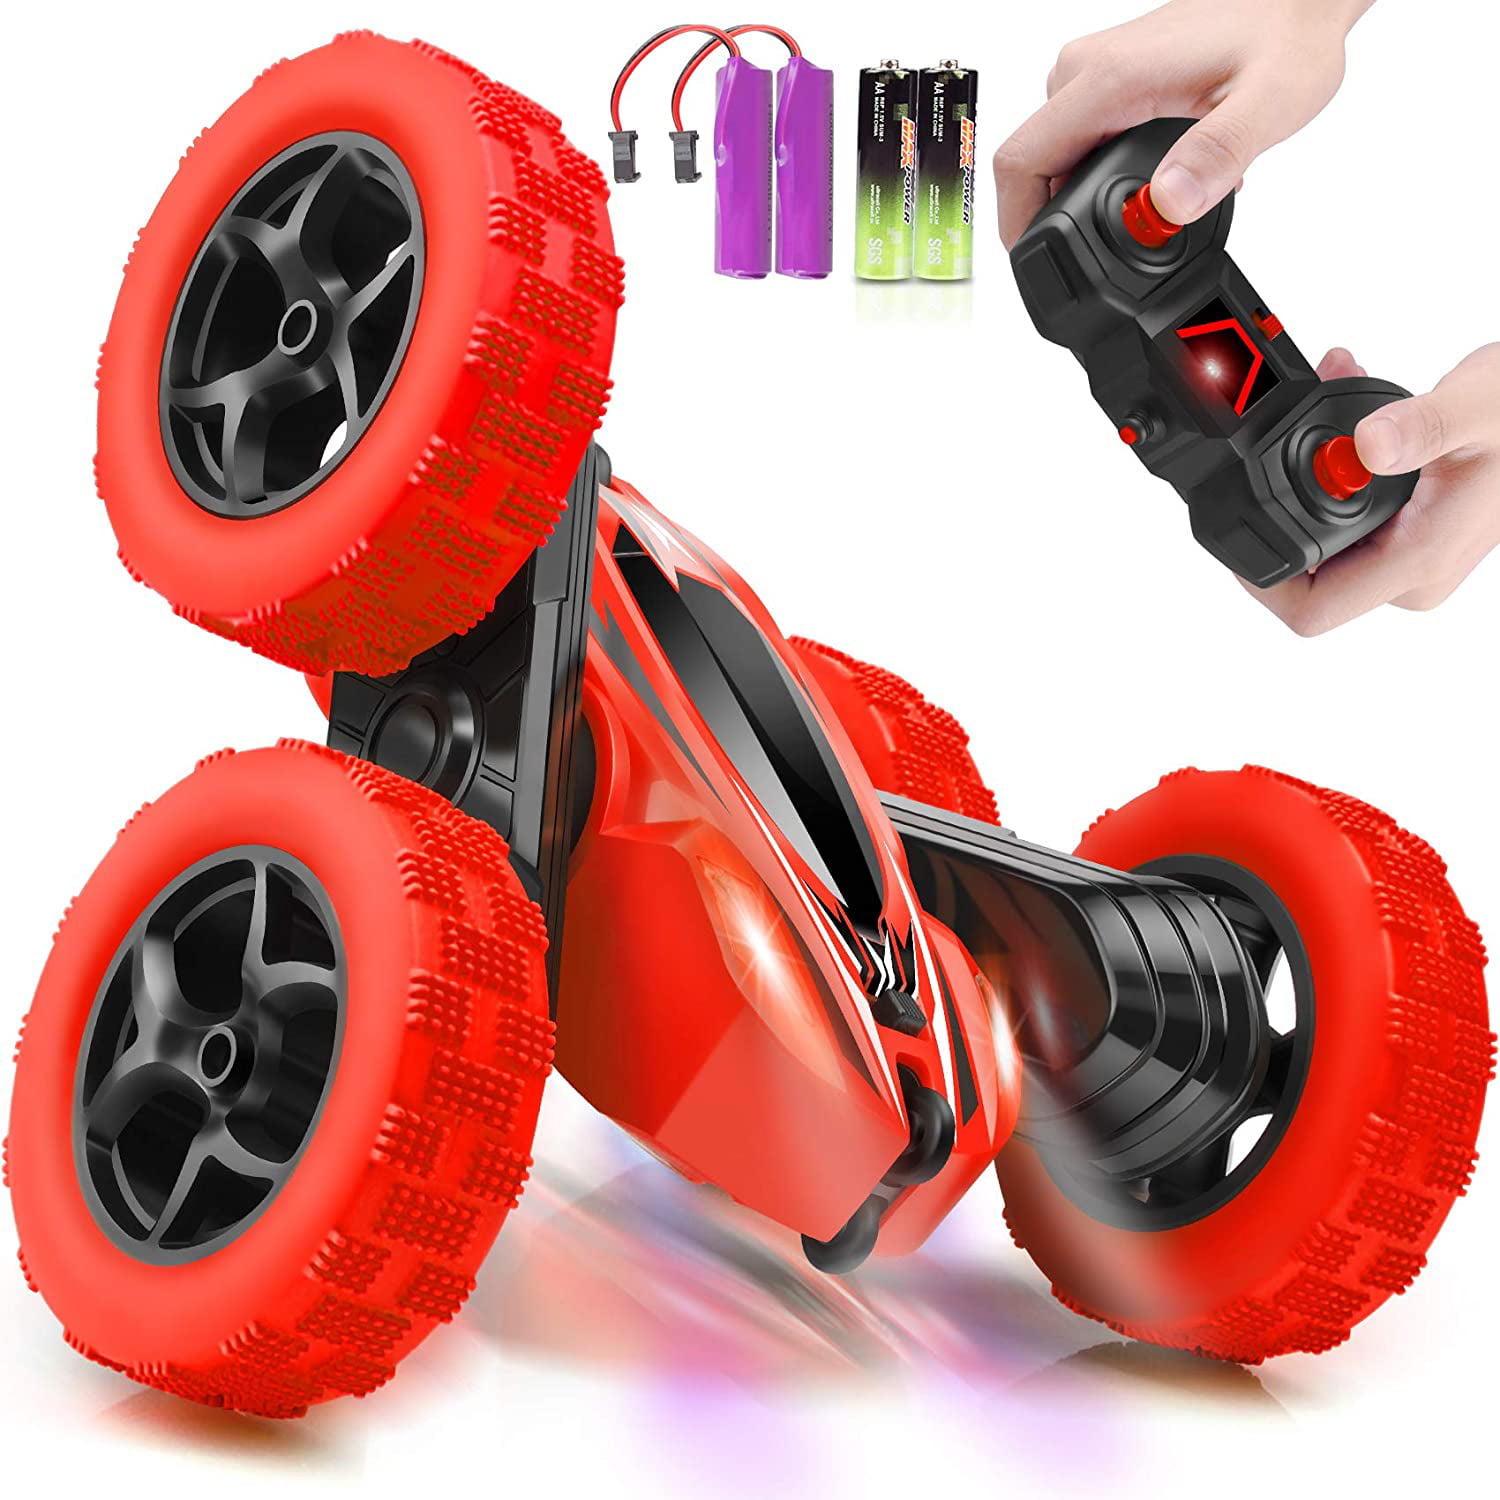 4WD 2.4Ghz Double Sided 360° Rotat... Remote Control Car RC Cars Stunt Car Toy 